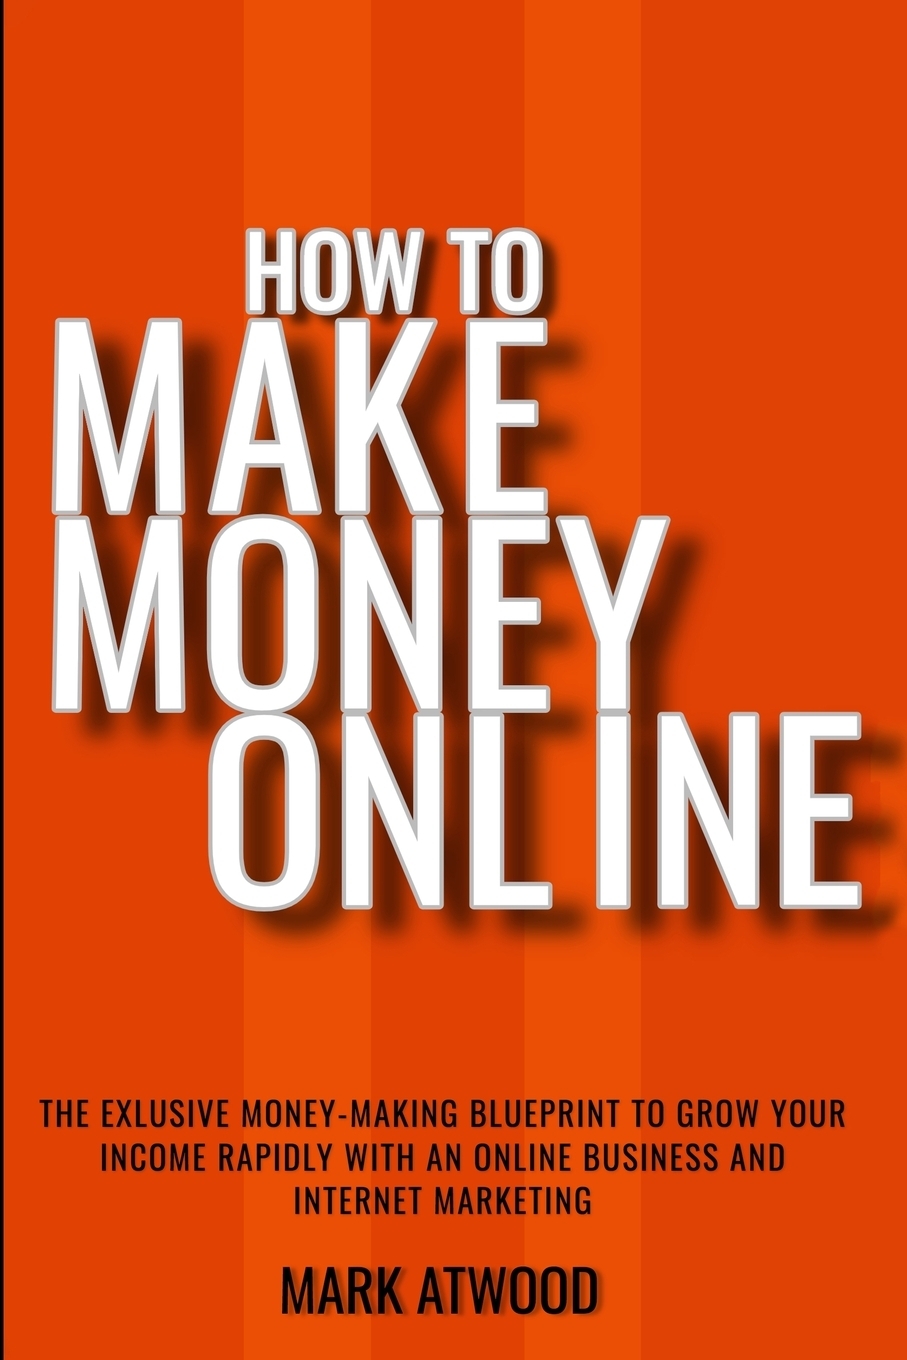 understand Making money online writing for profit very good